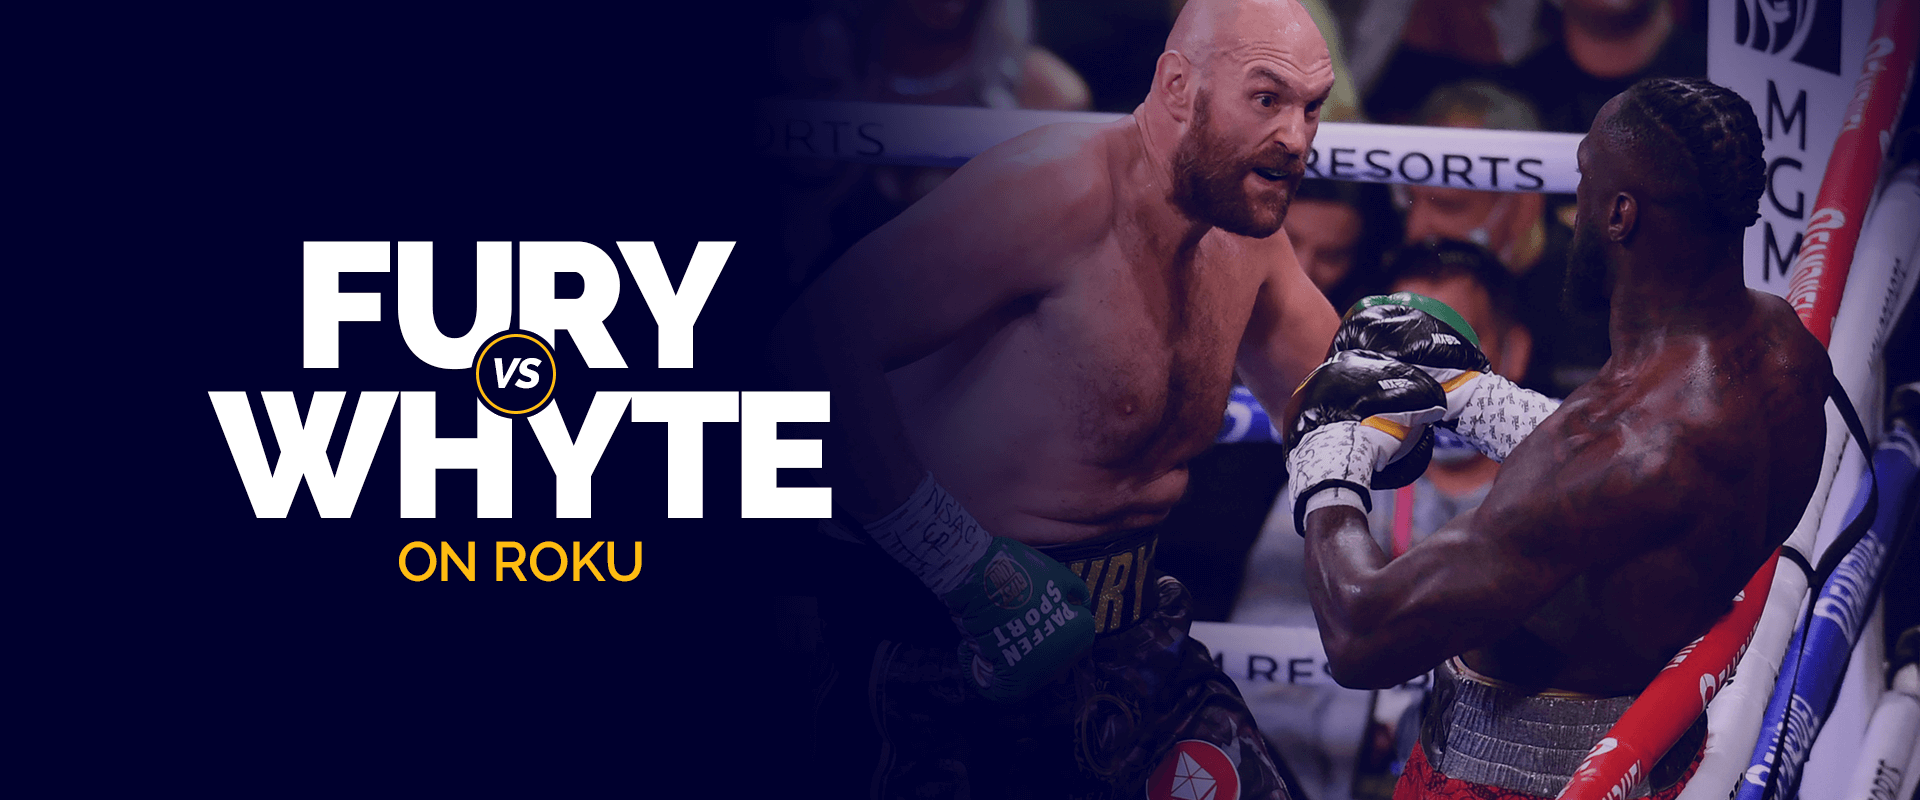 How to Watch Tyson Fury vs Dillian Whyte on Smart TV